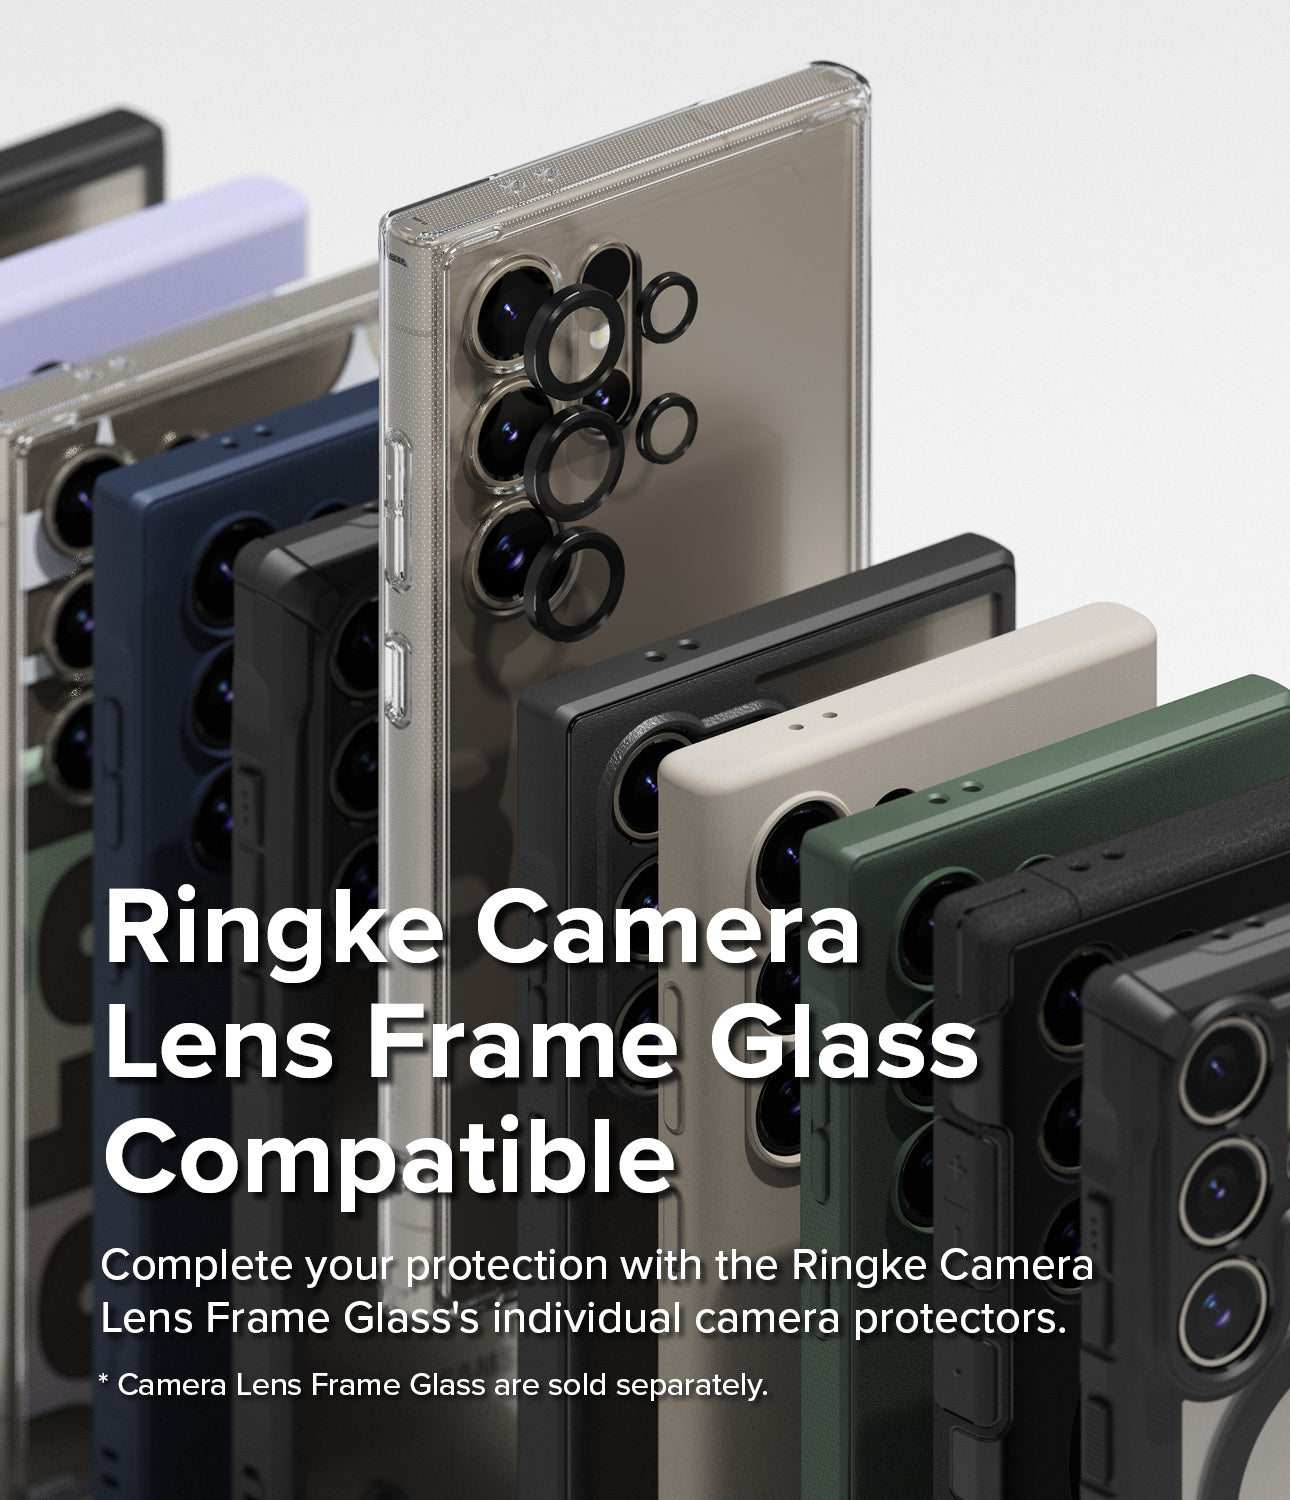 Galaxy S24 Ultra Case | Onyx Design - X - Ringke Camera Lens Frame Glass Compatible. Complete your protection with the Ringke Camera Lens Frame Glass' individual camera protectors.